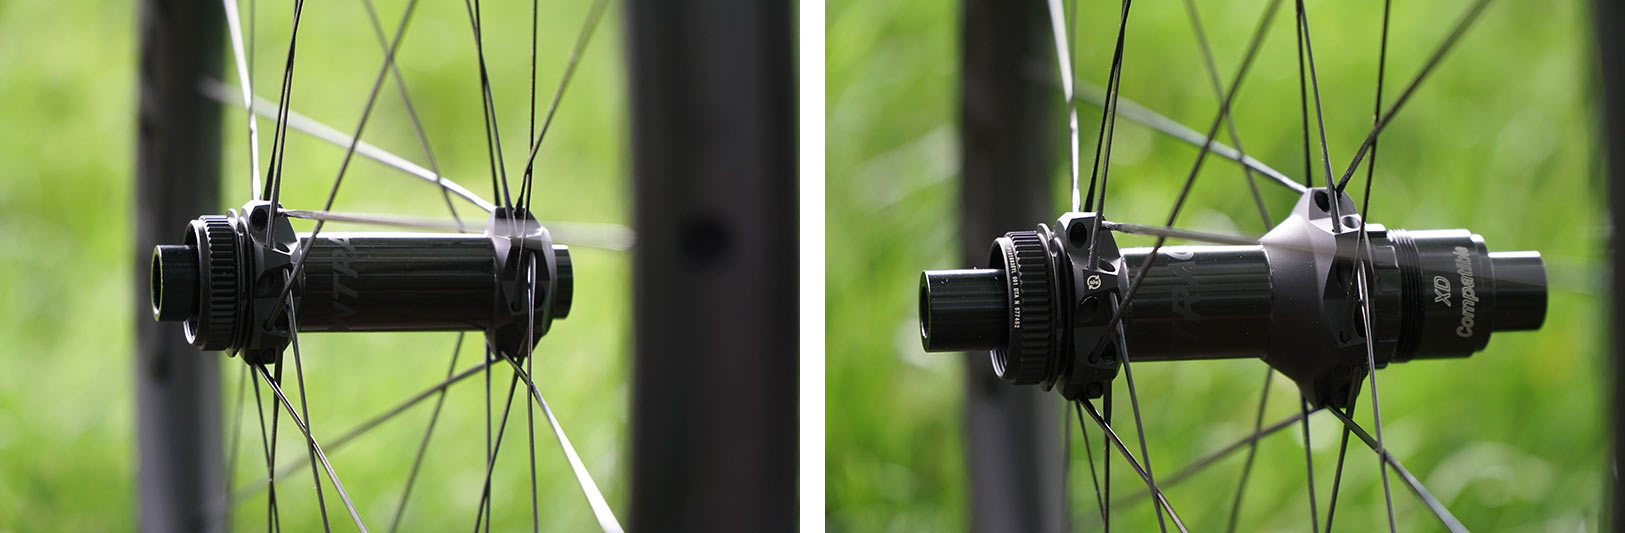 first look at new Bontrager Kovee XXX ultralight and wide xc mountain bike wheels tech details and actual weights